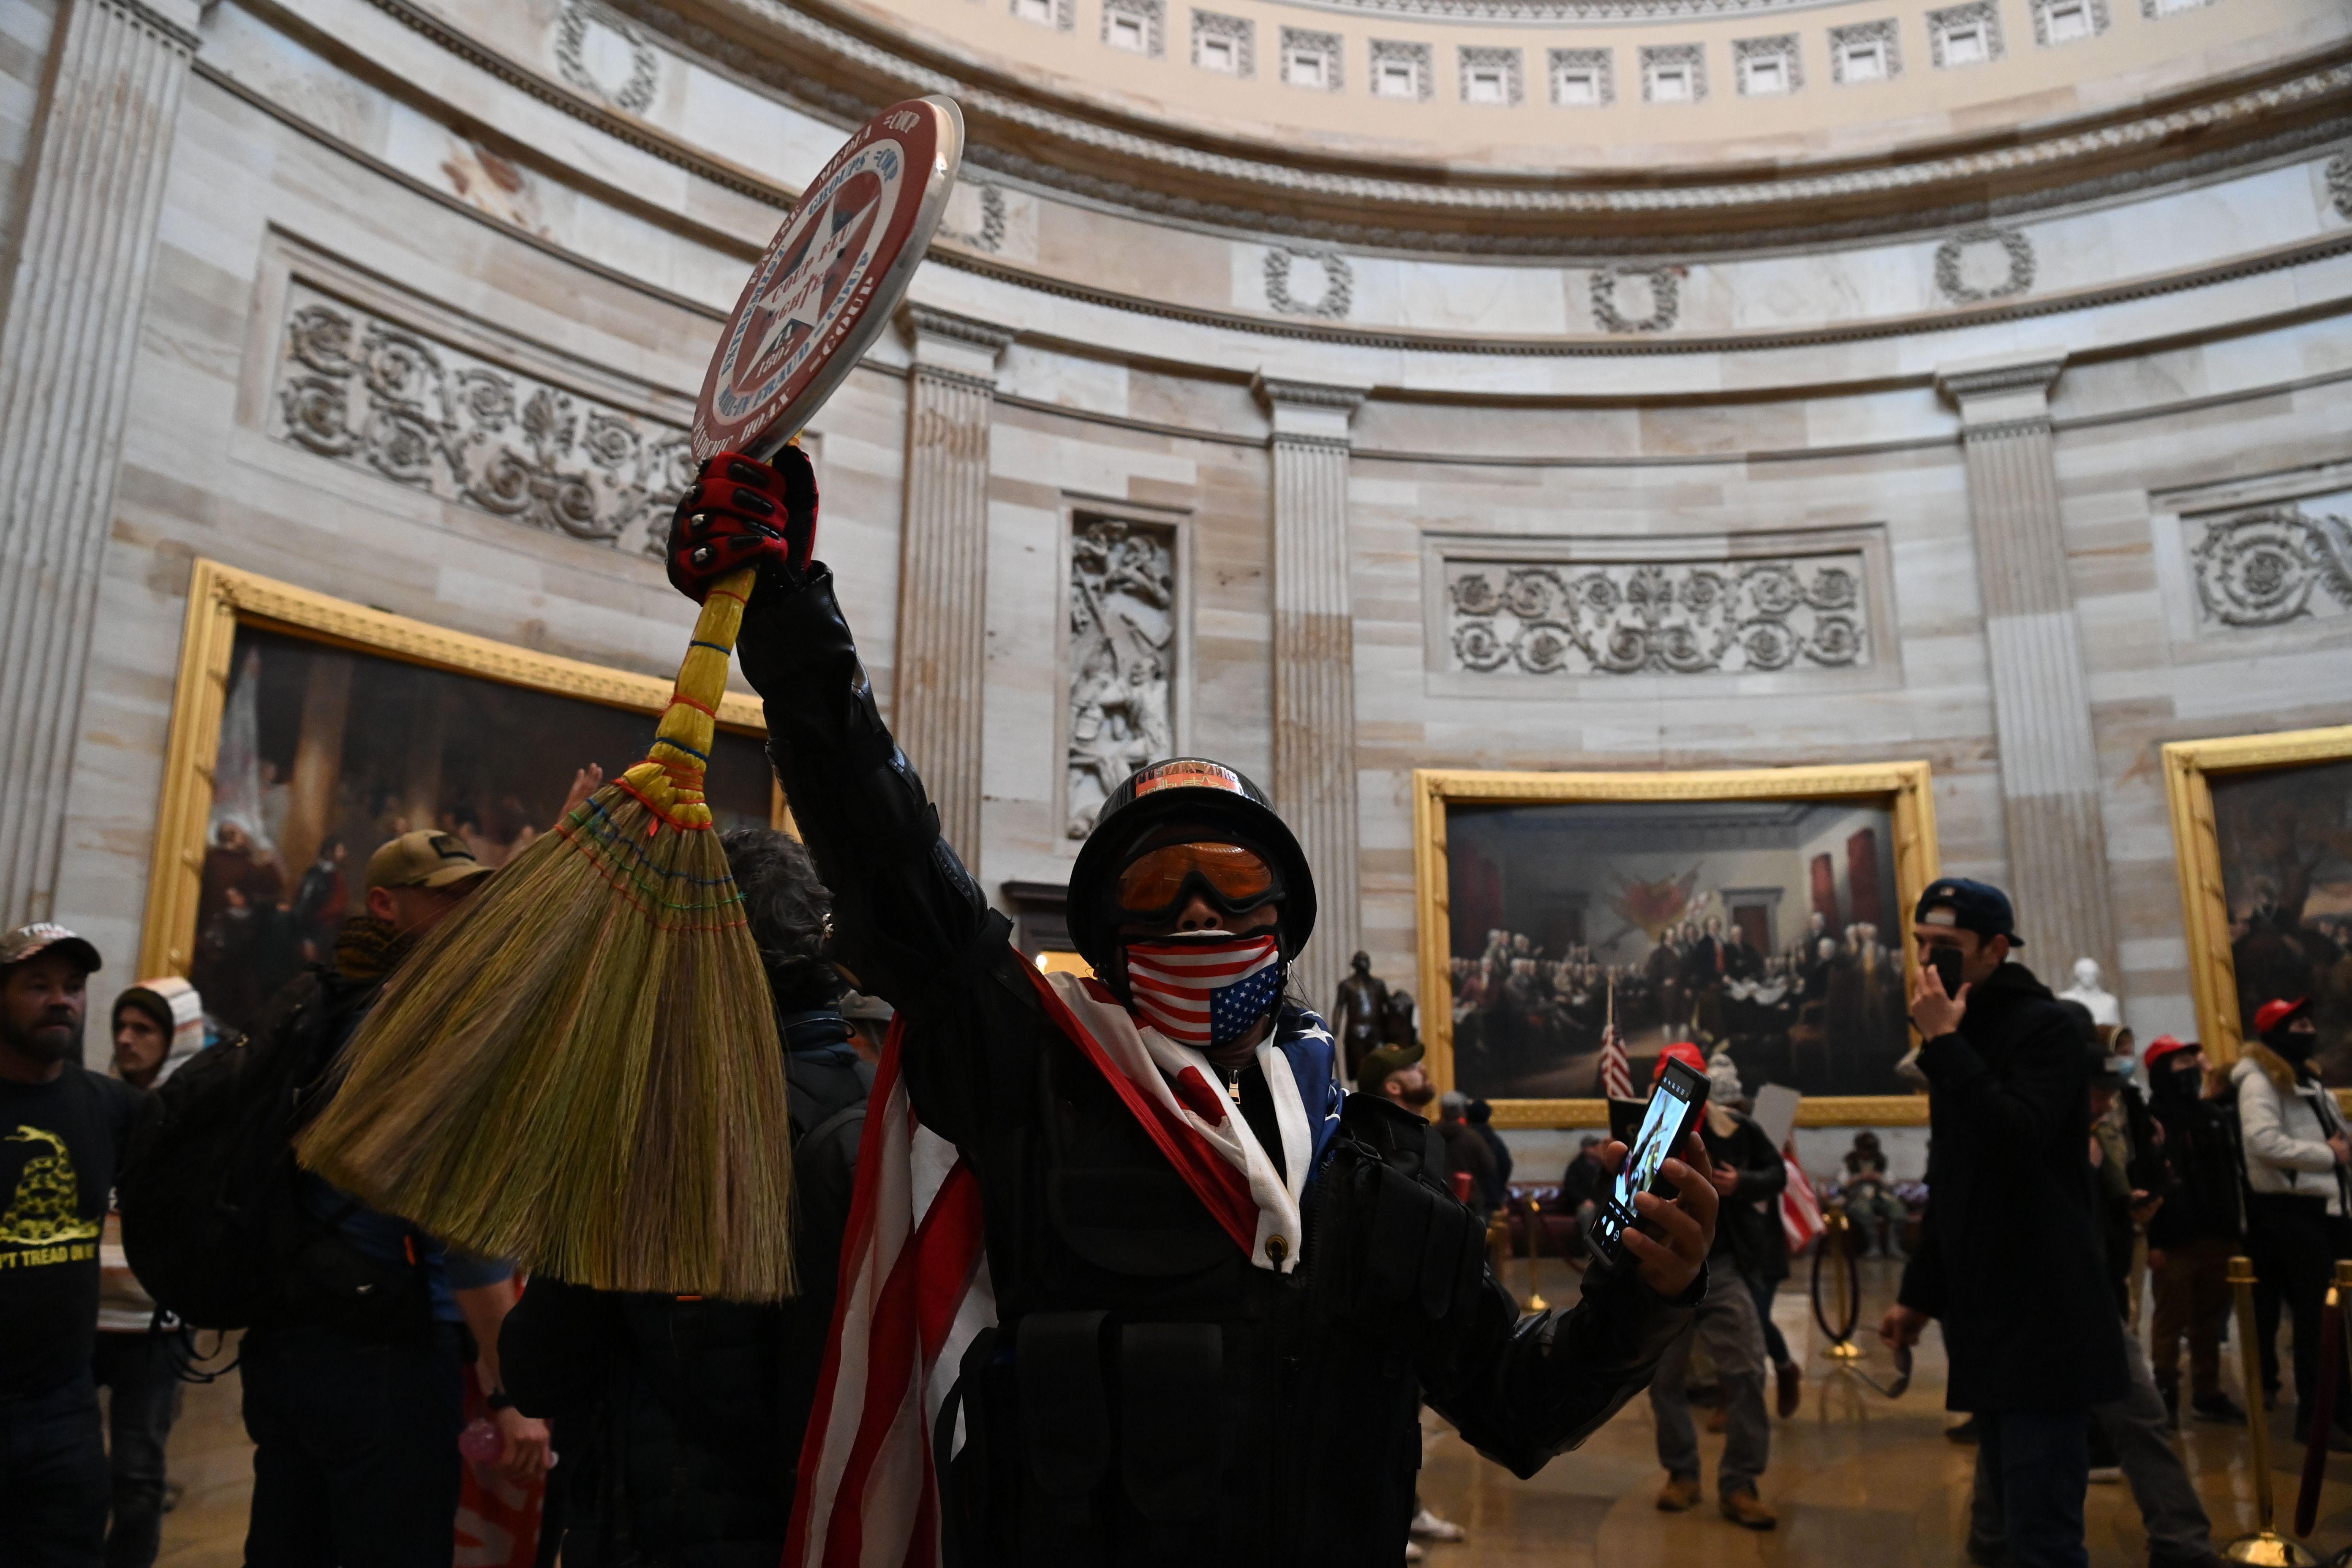 Supporters of US President Donald Trump enter the US Capitol's Rotunda on January 6, 2021, in Washington, DC. - Demonstrators breeched security and entered the Capitol as Congress debated the a 2020 presidential election Electoral Vote Certification. (Photo by Saul LOEB / AFP) (Photo by SAUL LOEB/AFP via Getty Images)